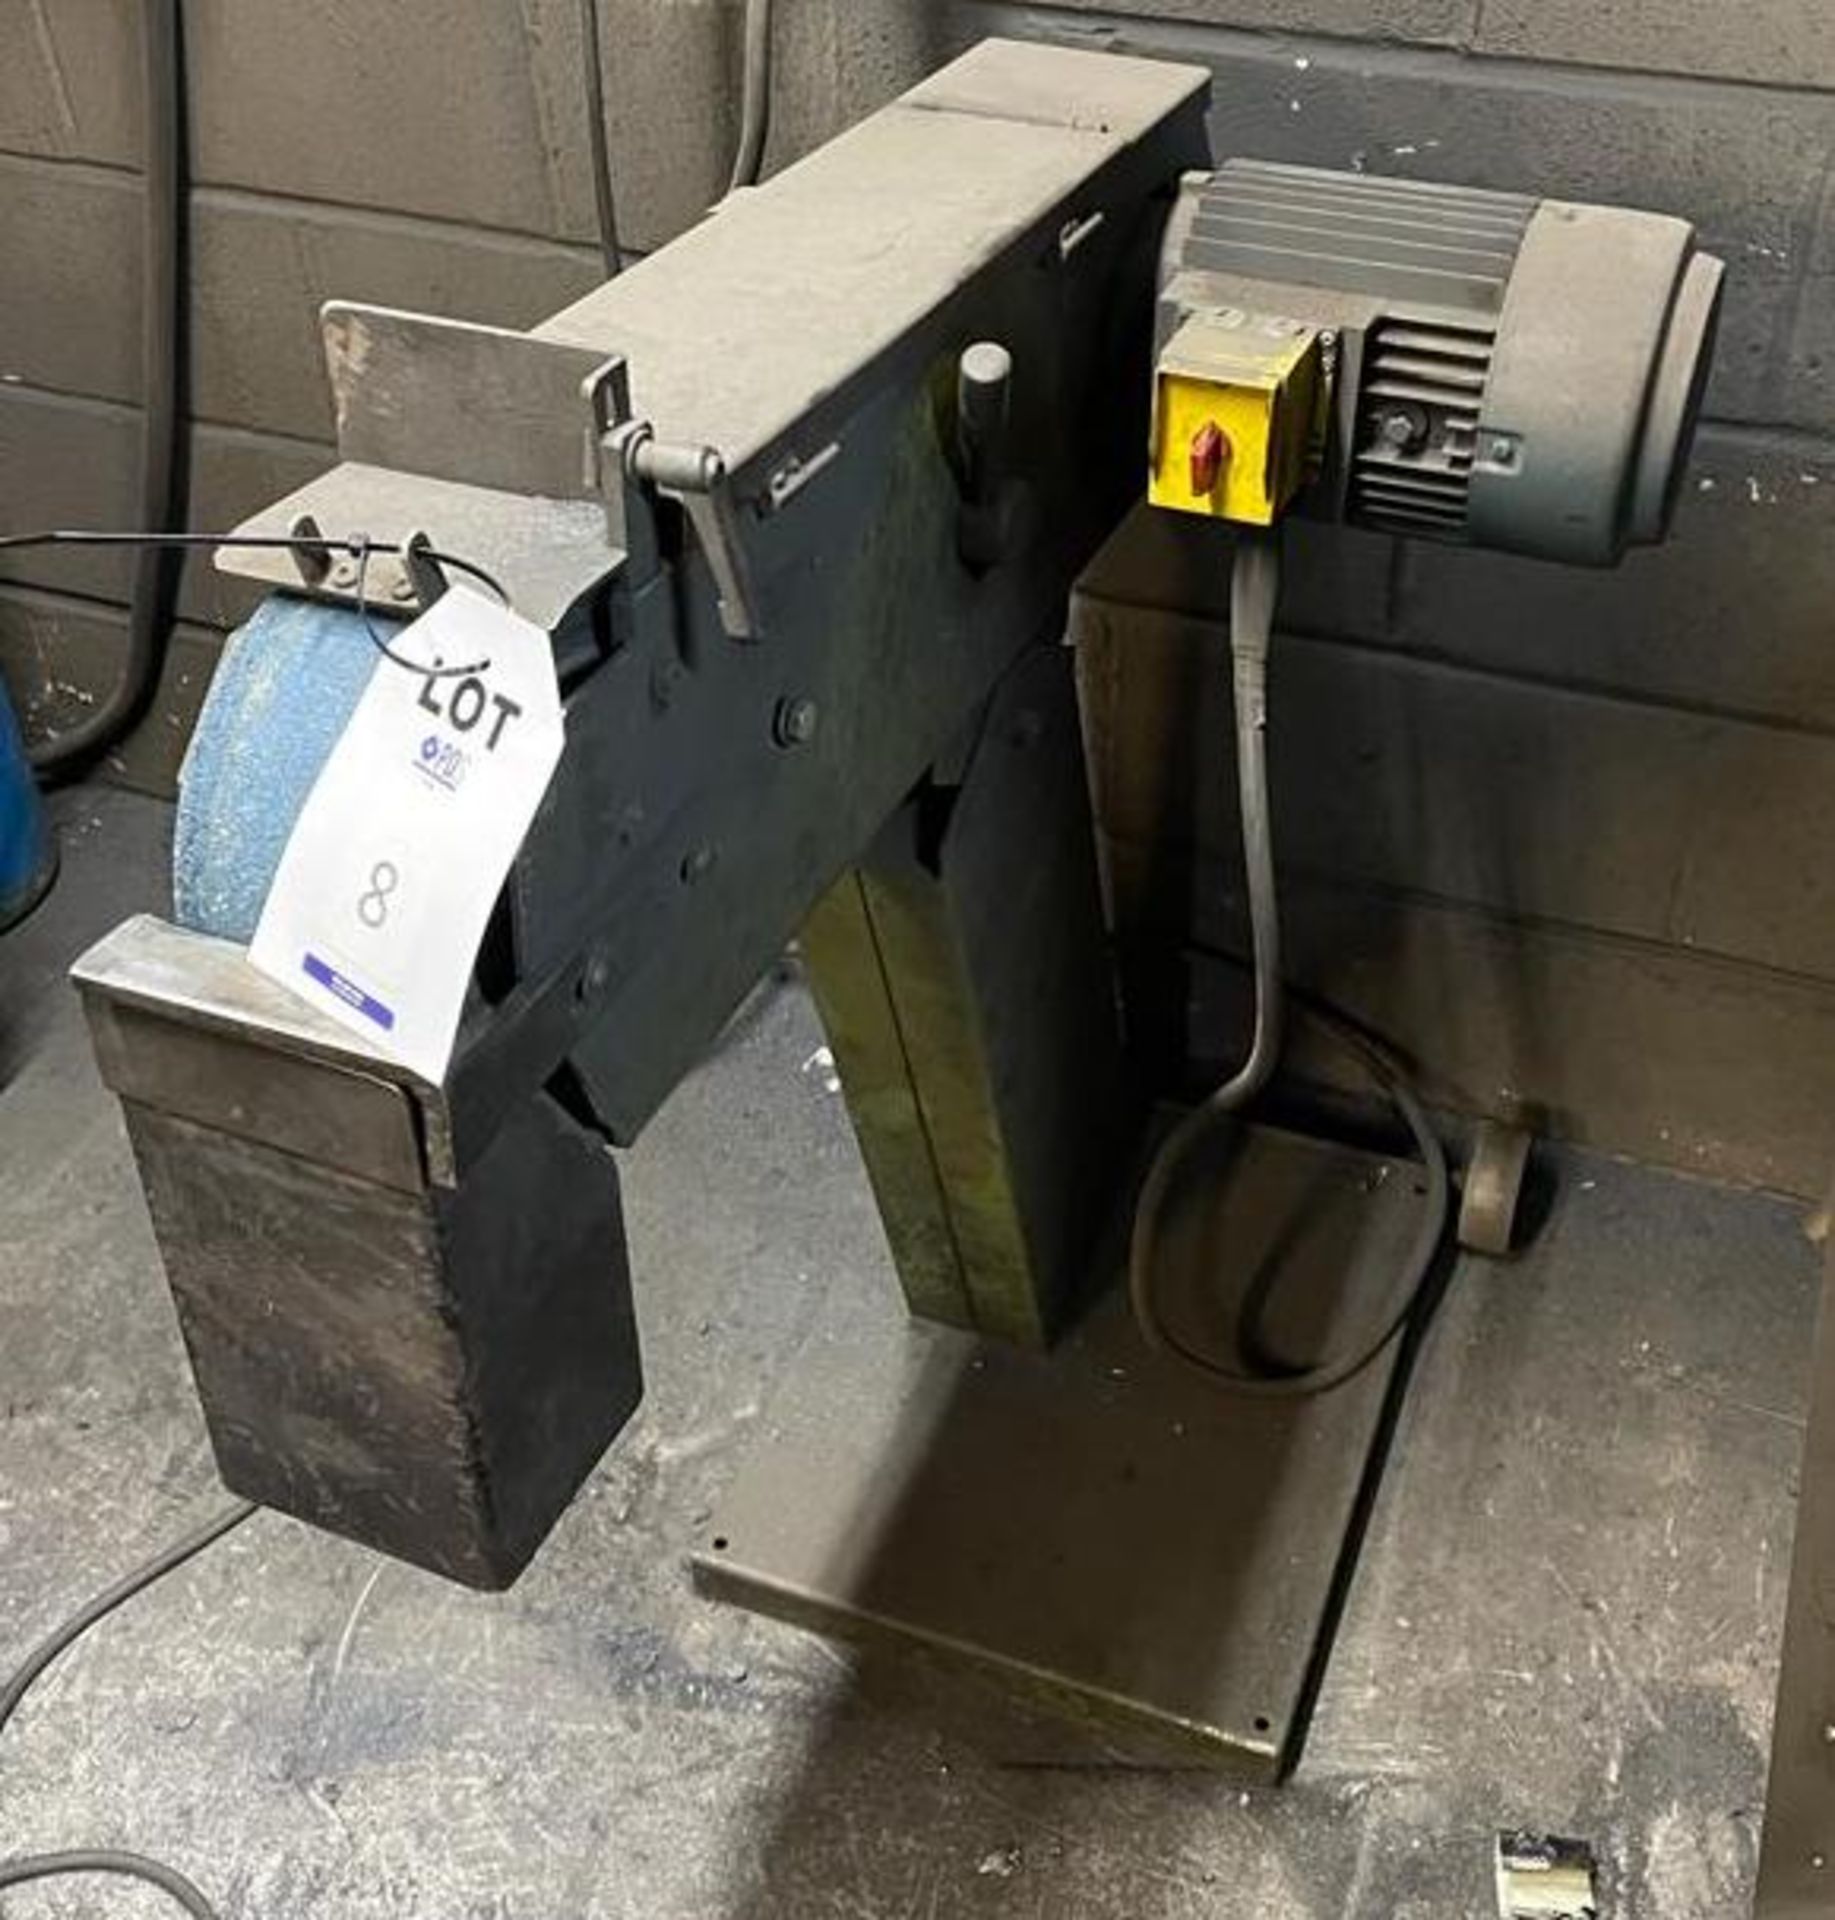 HM TAS-100 100 x 2000mm Belt Linisher, Serial Number 1110267 (Location Colchester. Please Refer to